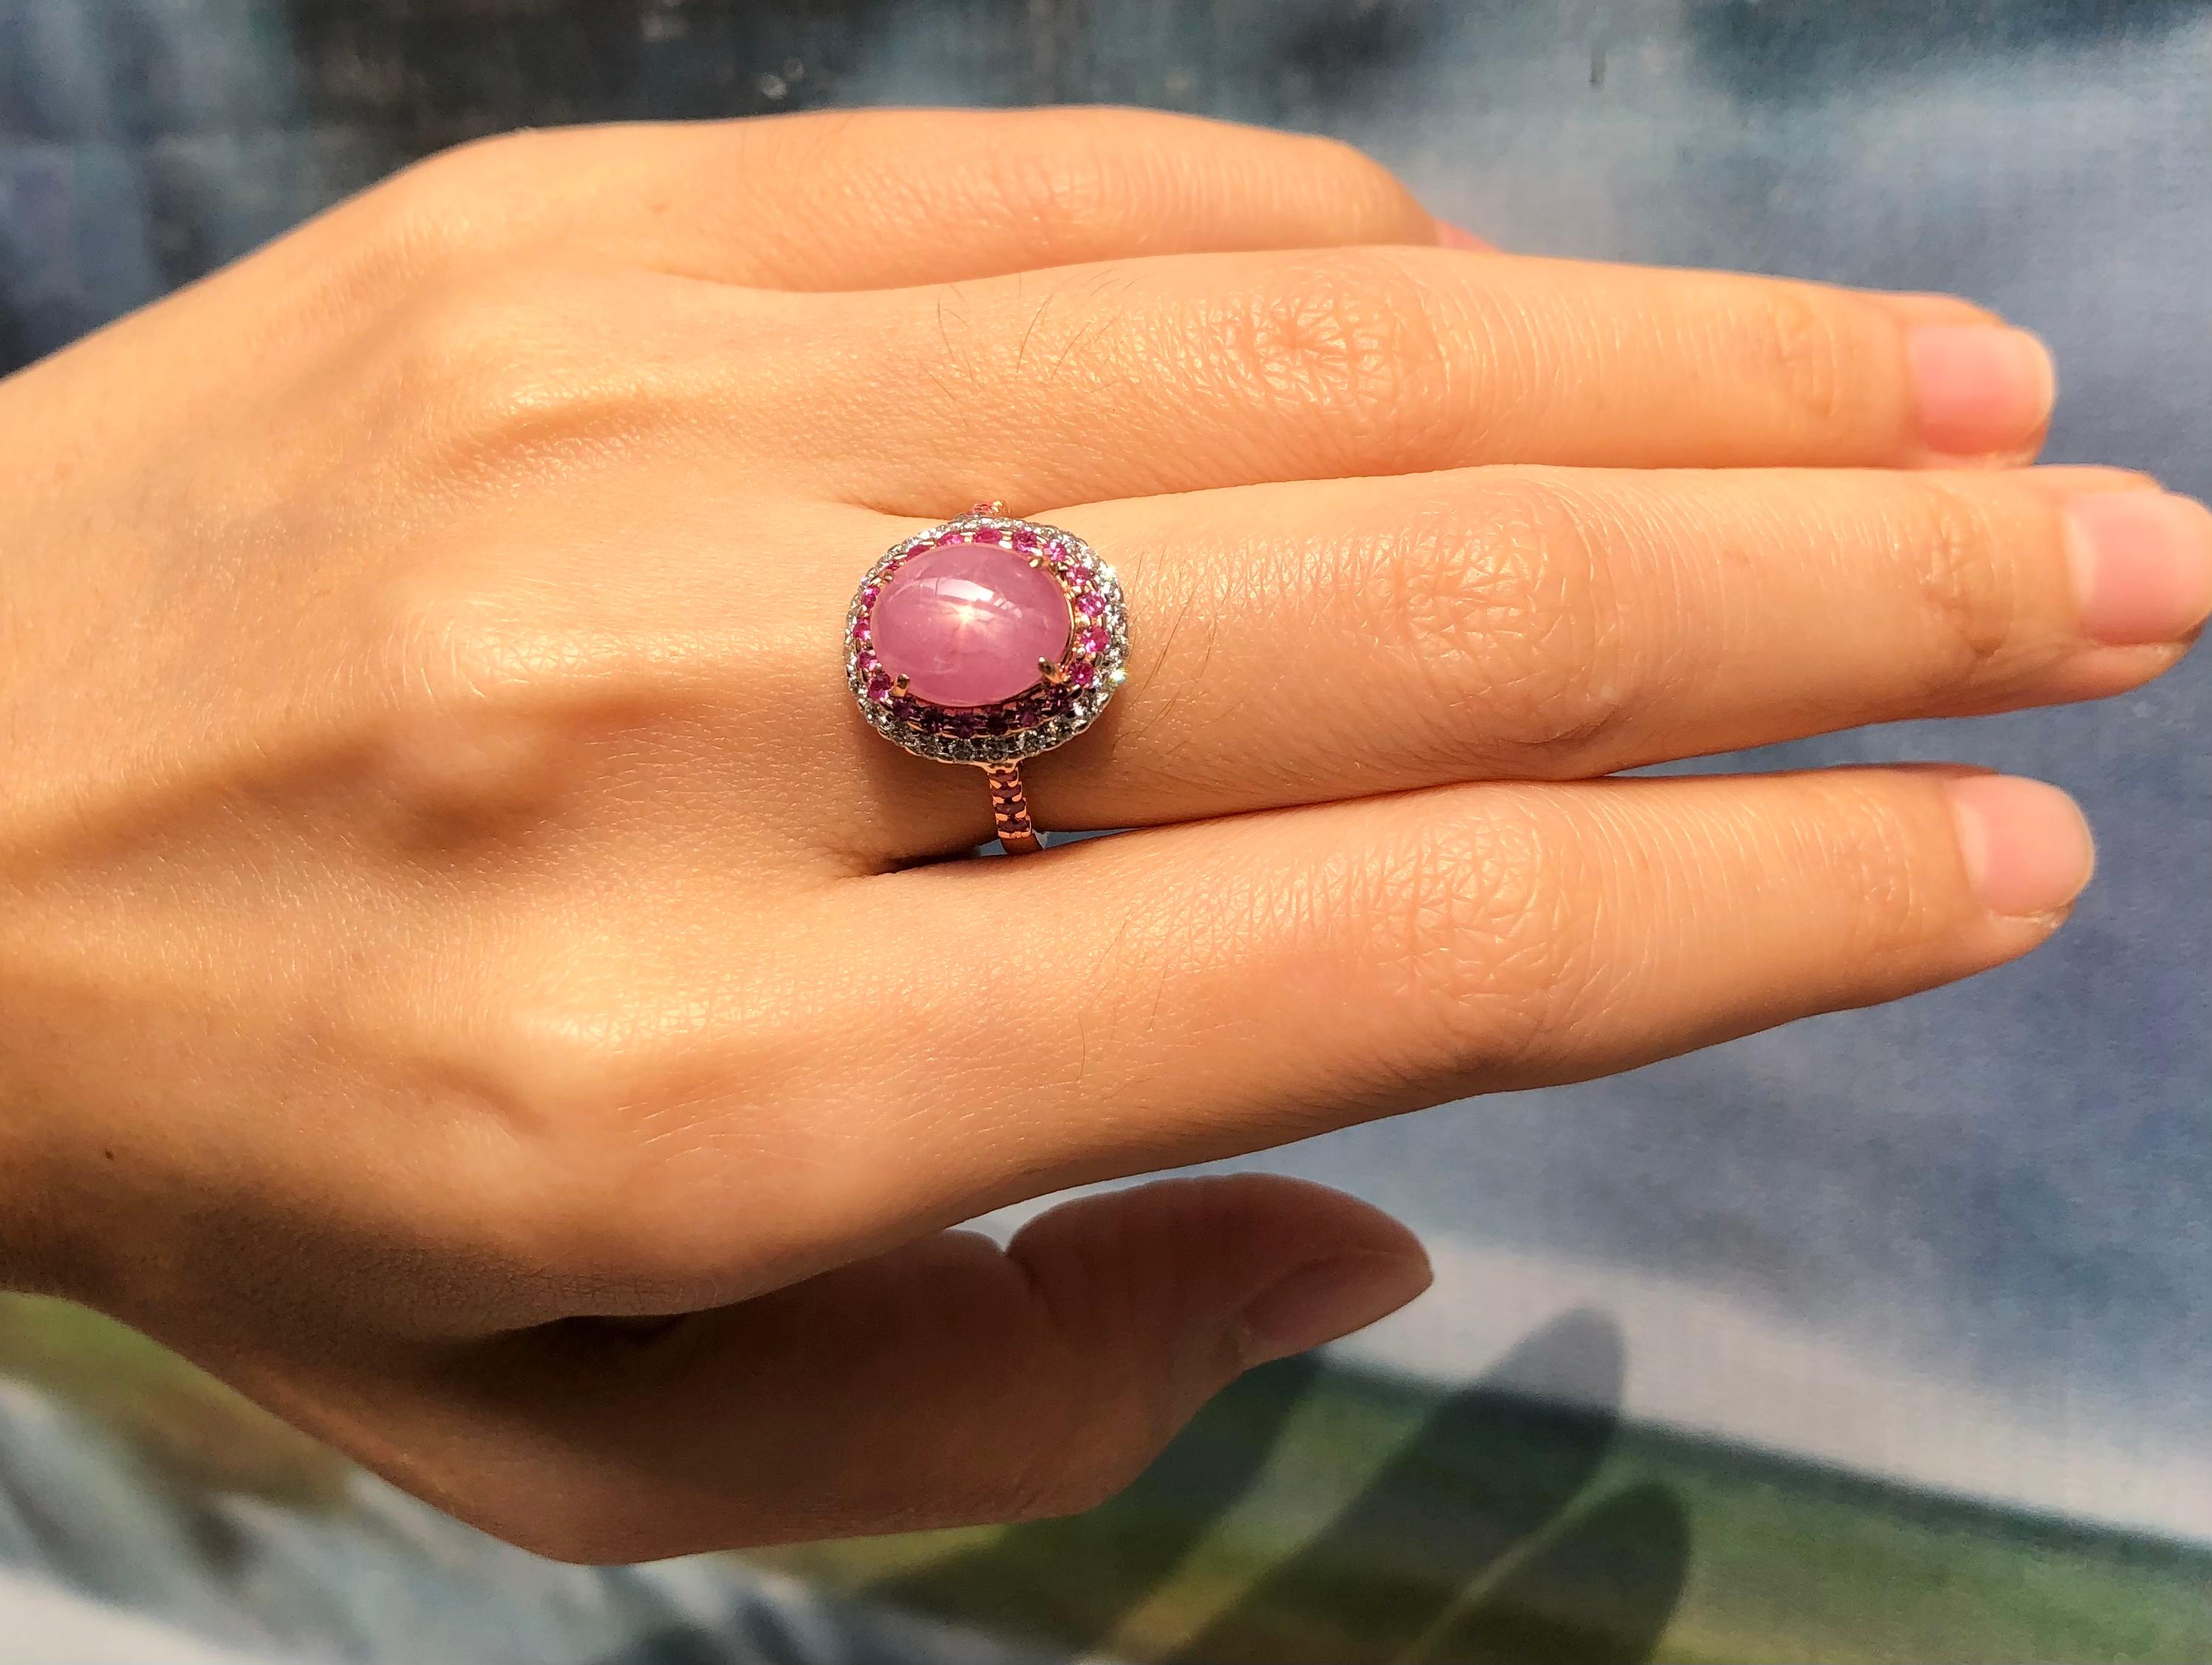 Star Pink Sapphire 4.09 carats with Pink Sapphire 0.32 carat and Diamond 0.25 carat Ring set in 18 Karat Rose Gold Settings
(GIT Certified, The Gem and Jewelry Institute of Thailand)

Width:  1.2 cm 
Length: 1.5 cm
Ring Size: 51
Total Weight: 4.29